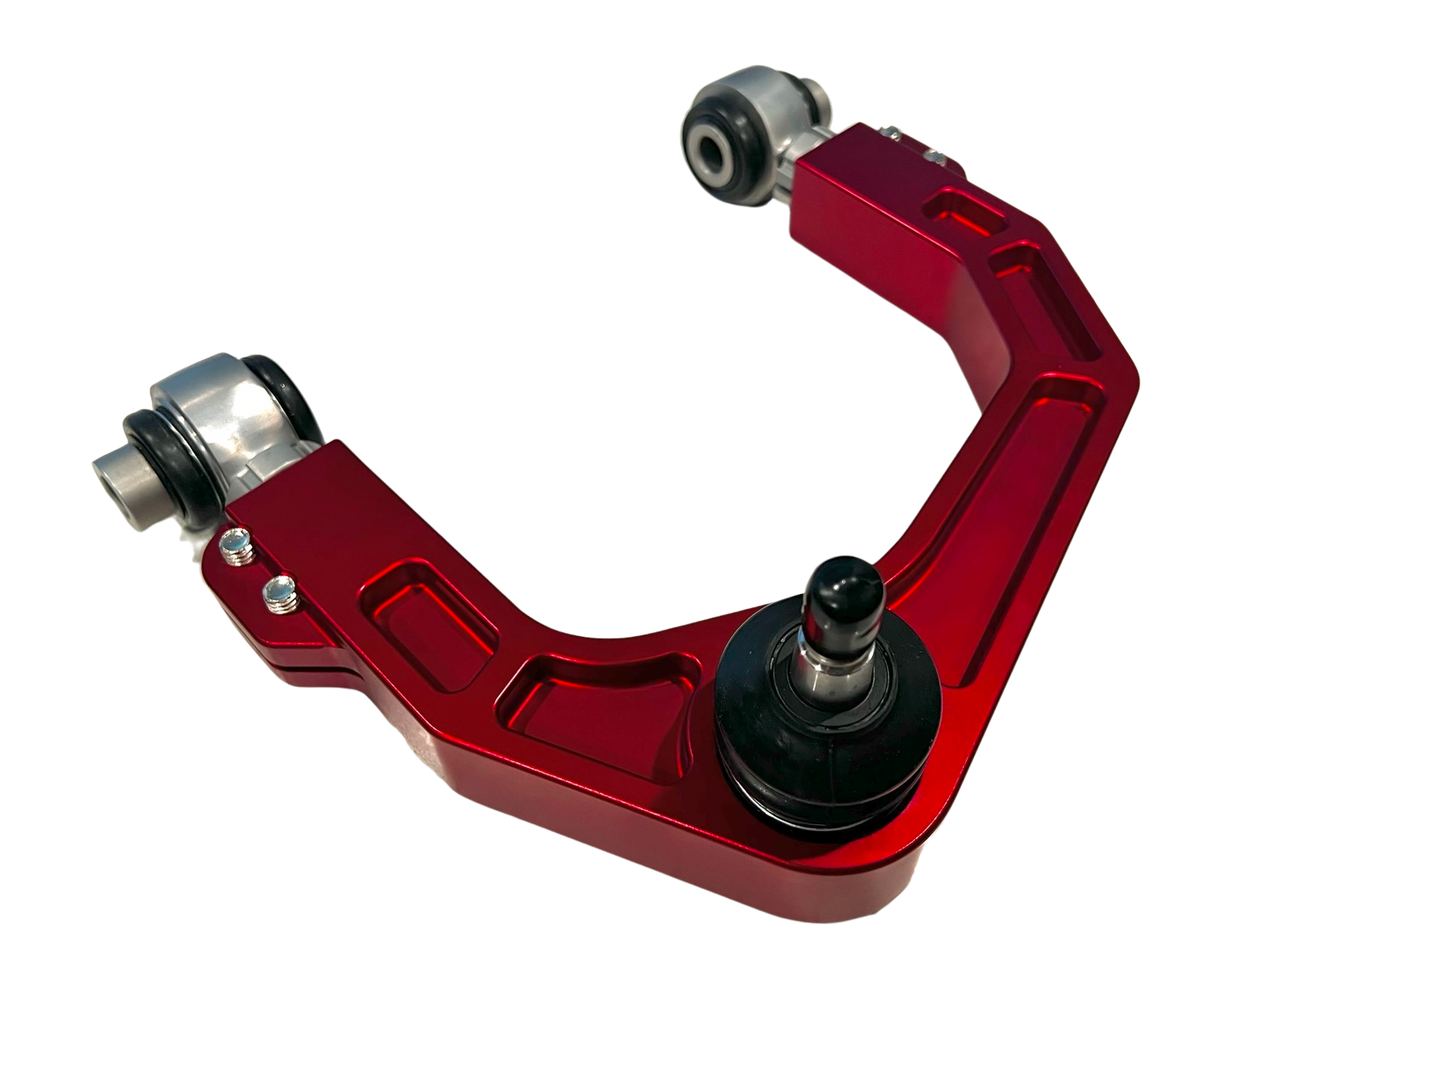 Send It Suspension Billet Upper Control Arms 05+ Tacoma Red - Mid-Atlantic Off-Roading